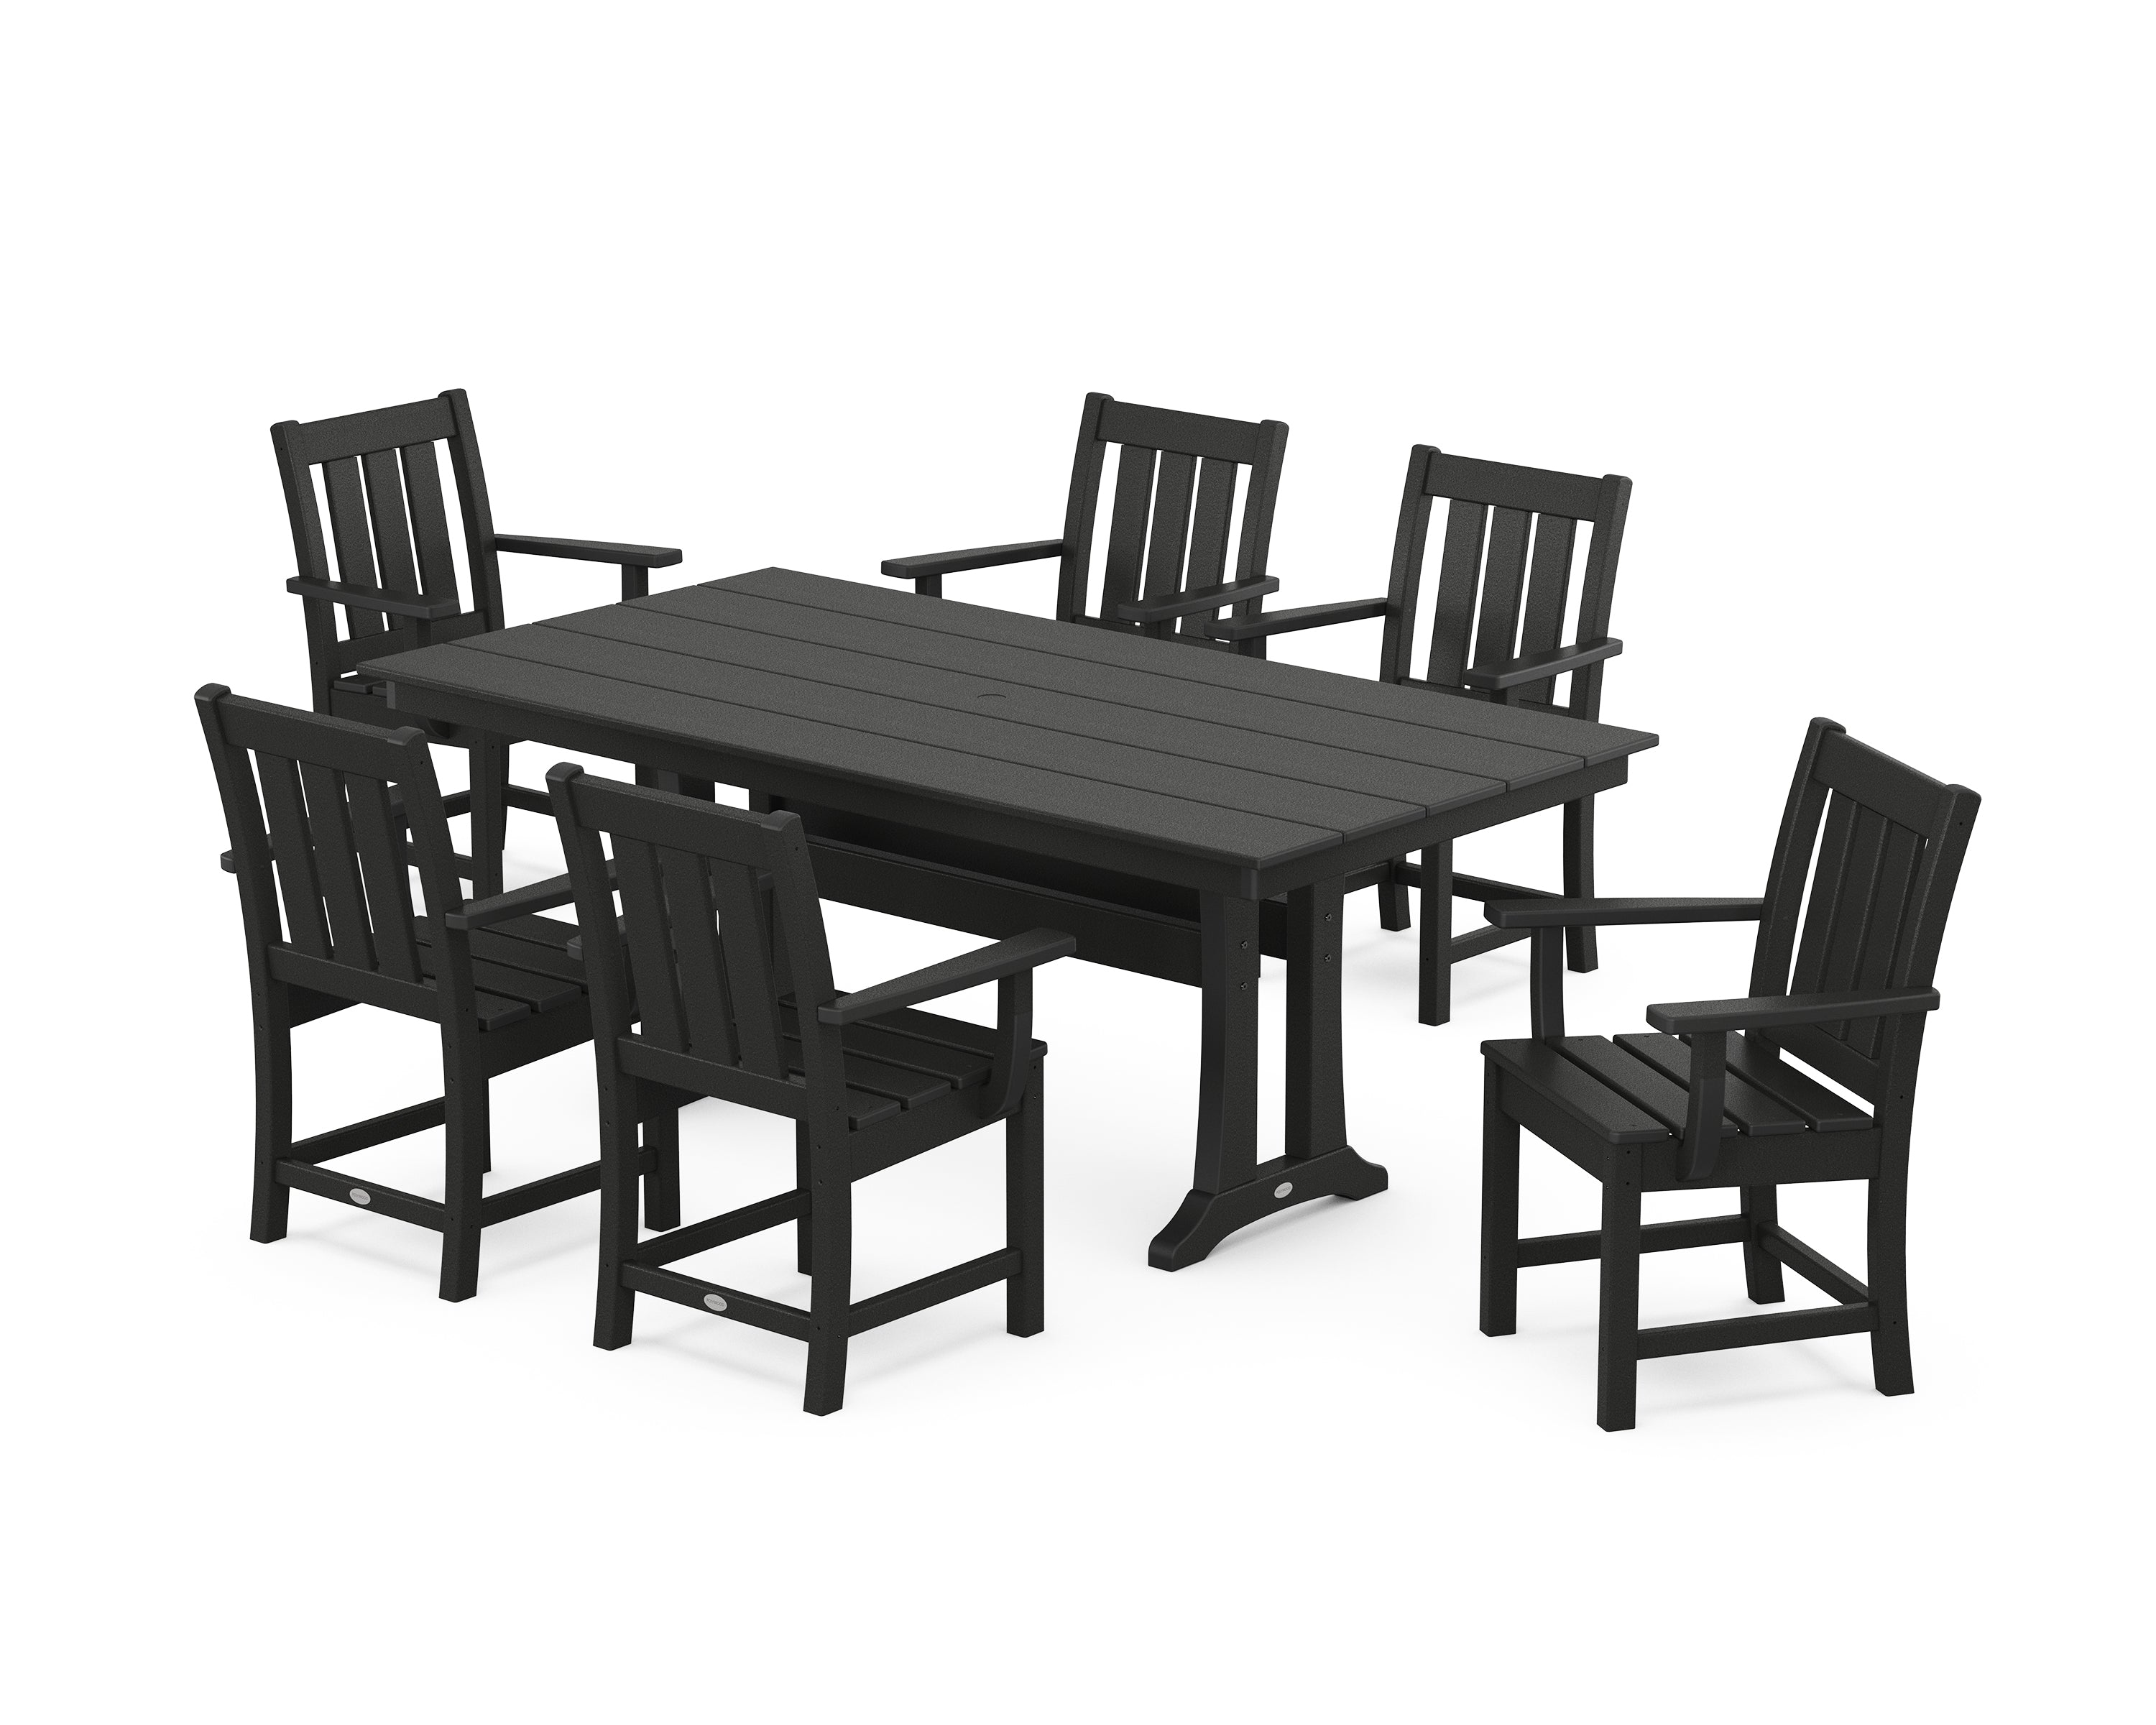 POLYWOOD® Oxford Arm Chair 7-Piece Farmhouse Dining Set with Trestle Legs in Black